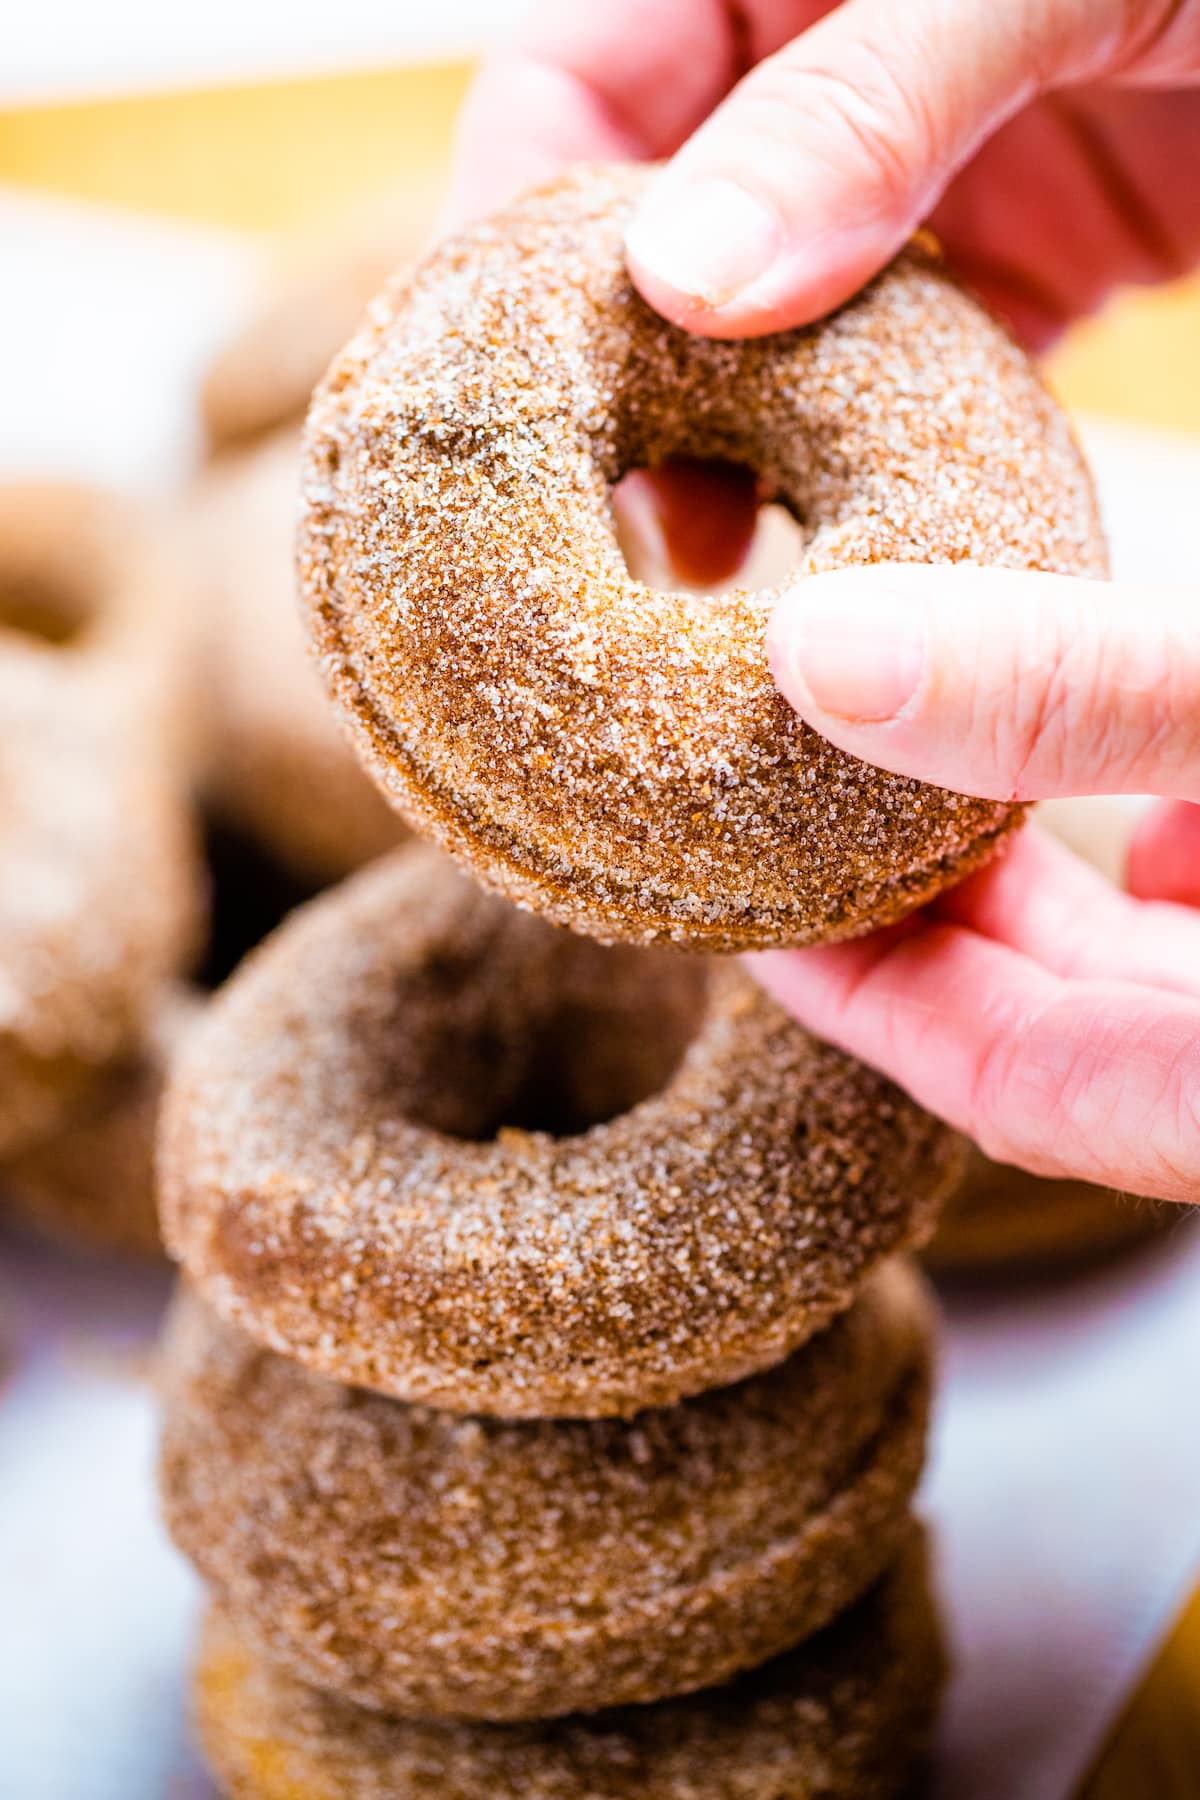 Four doughnuts stacked on top of each other coated in cinnamon sugar with a hand holding the top one.